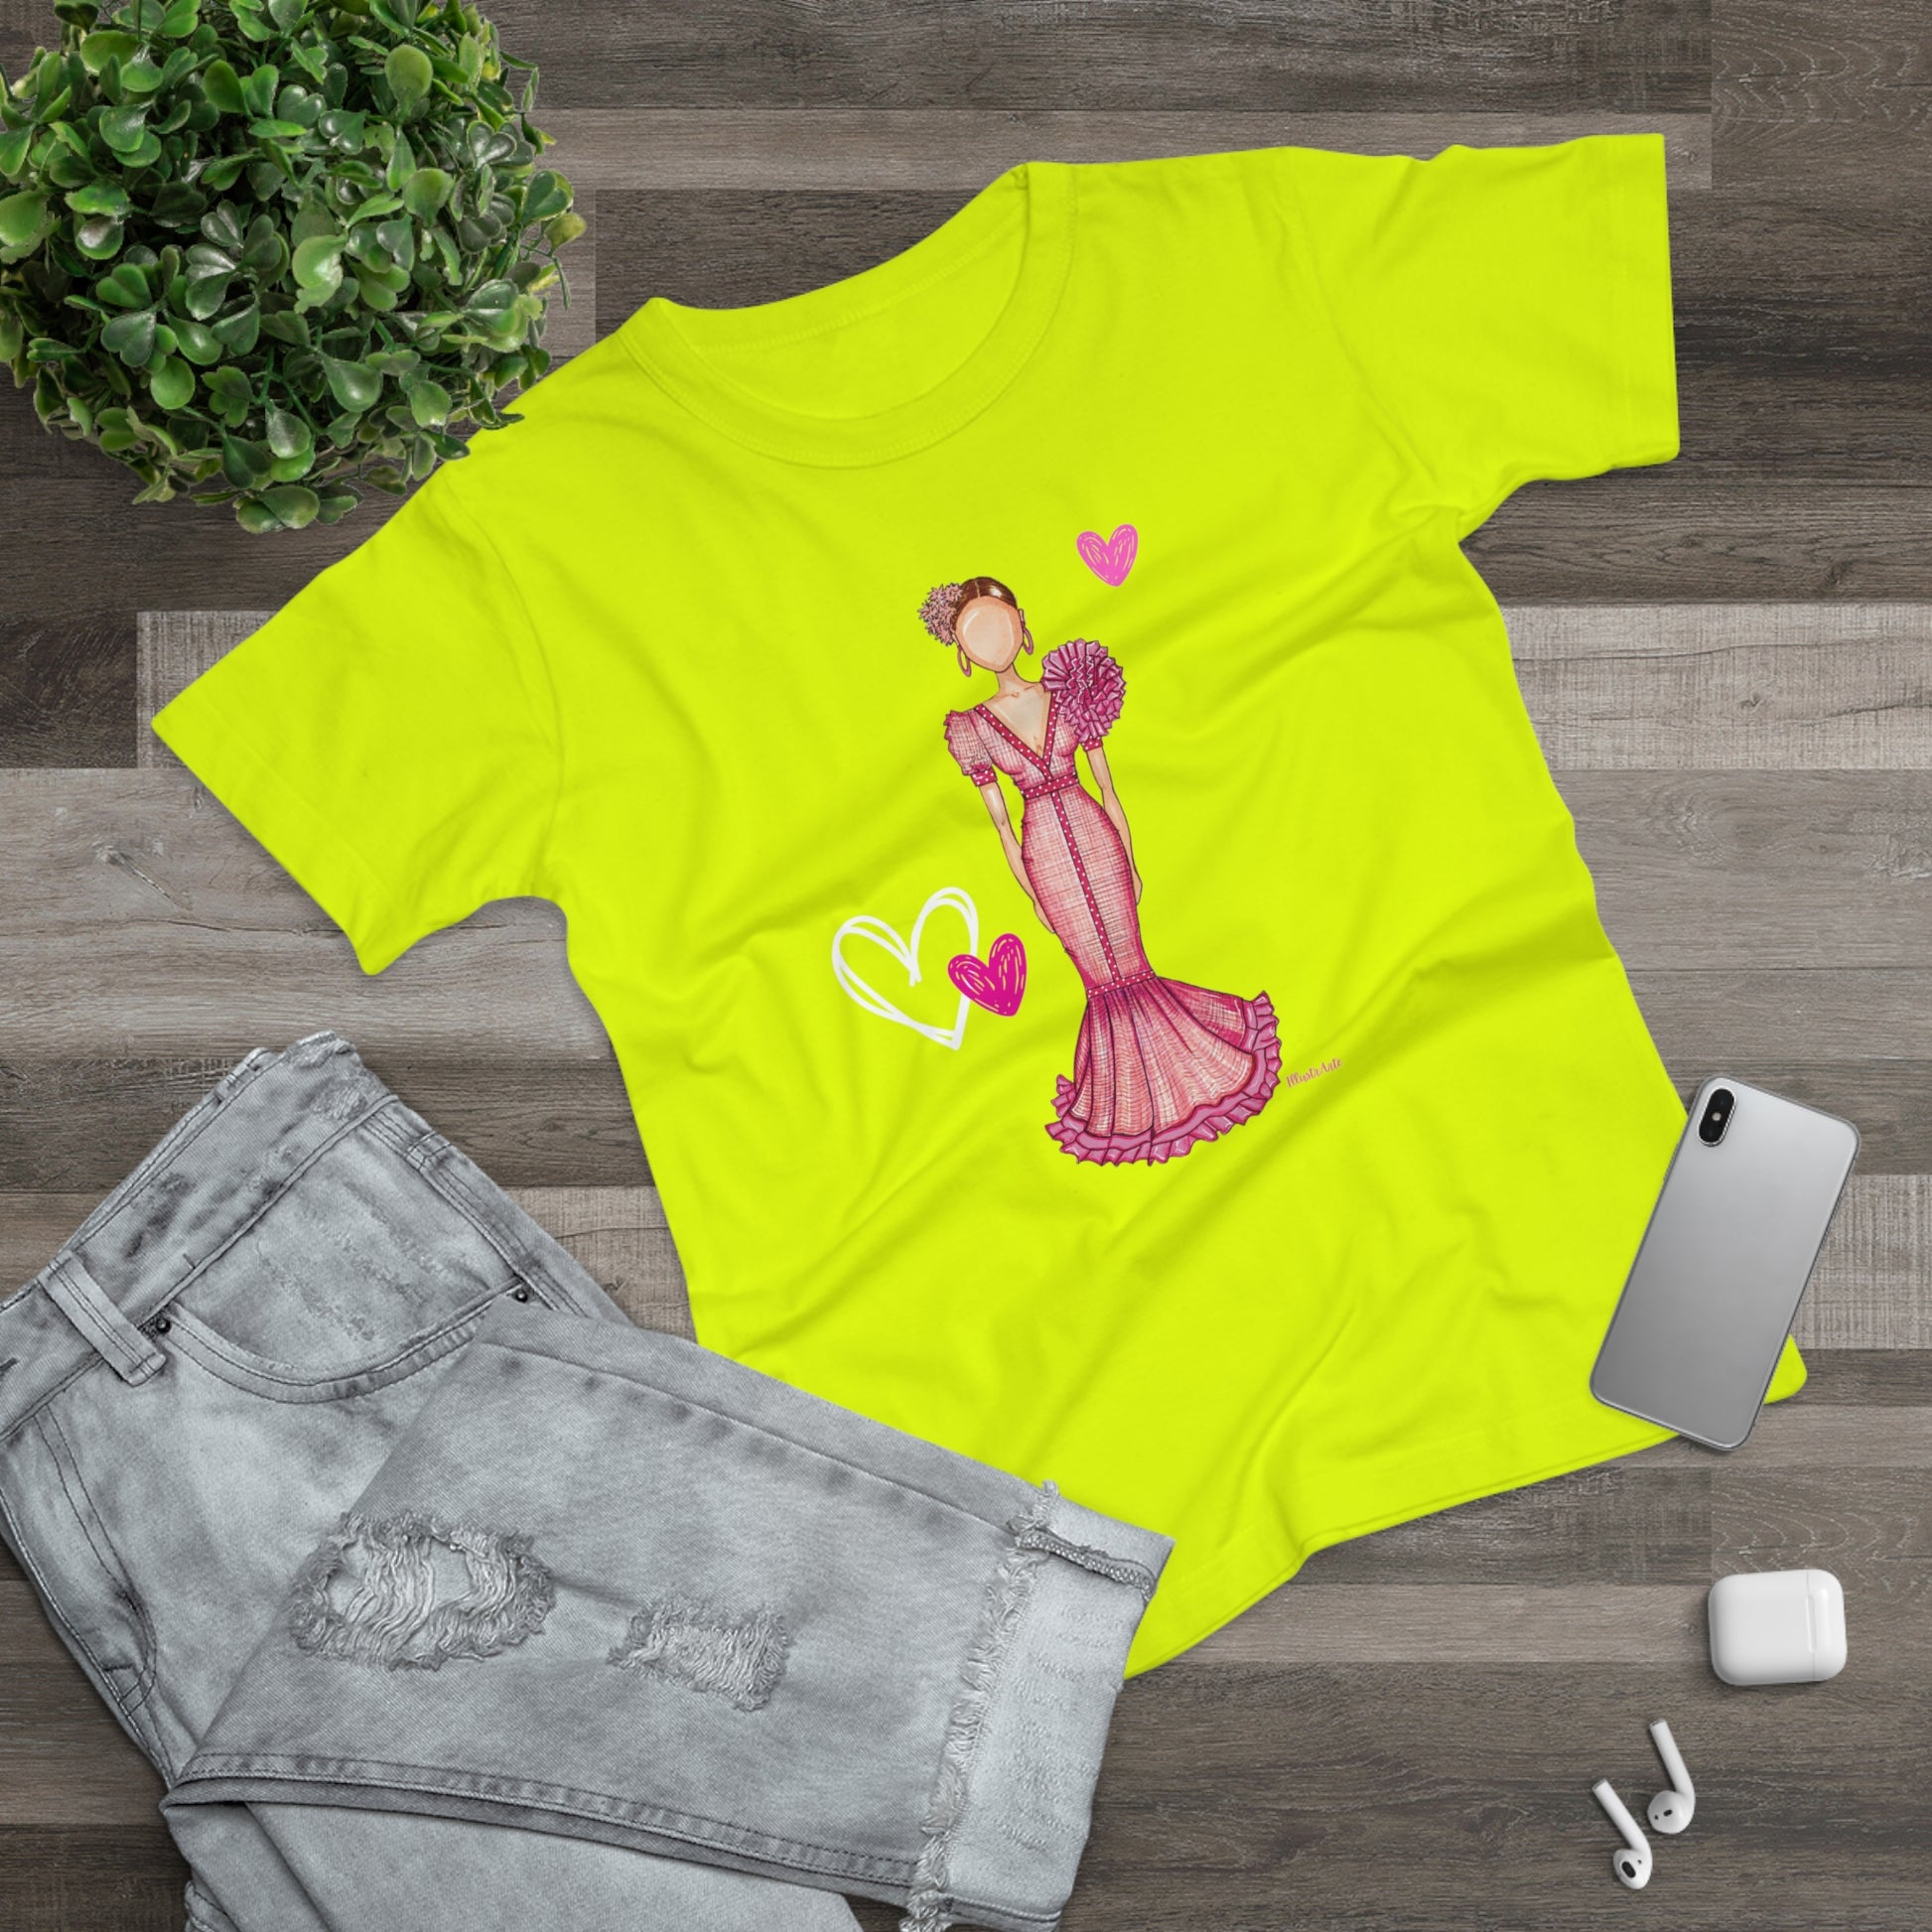 a yellow shirt with a picture of a woman on it